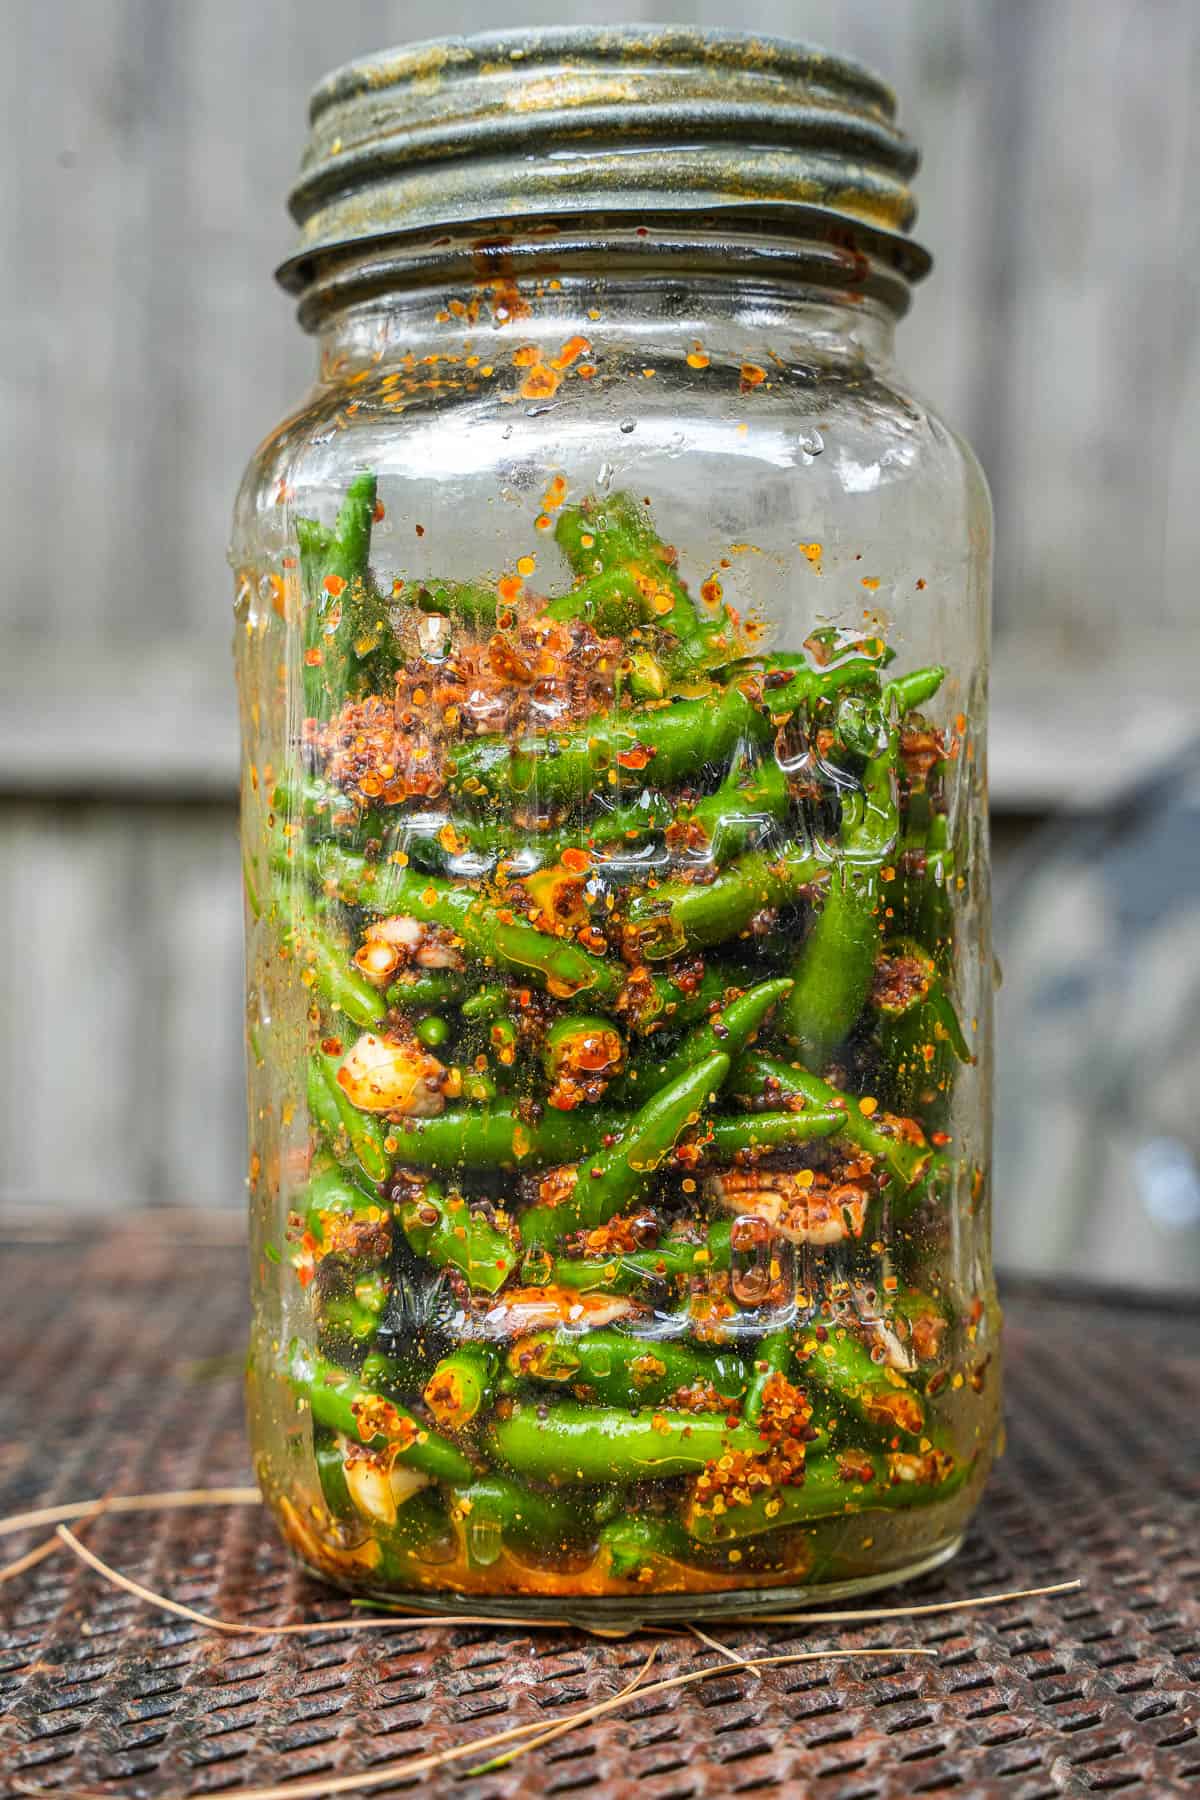 Green chili pickle is fermenting in a glass jar.